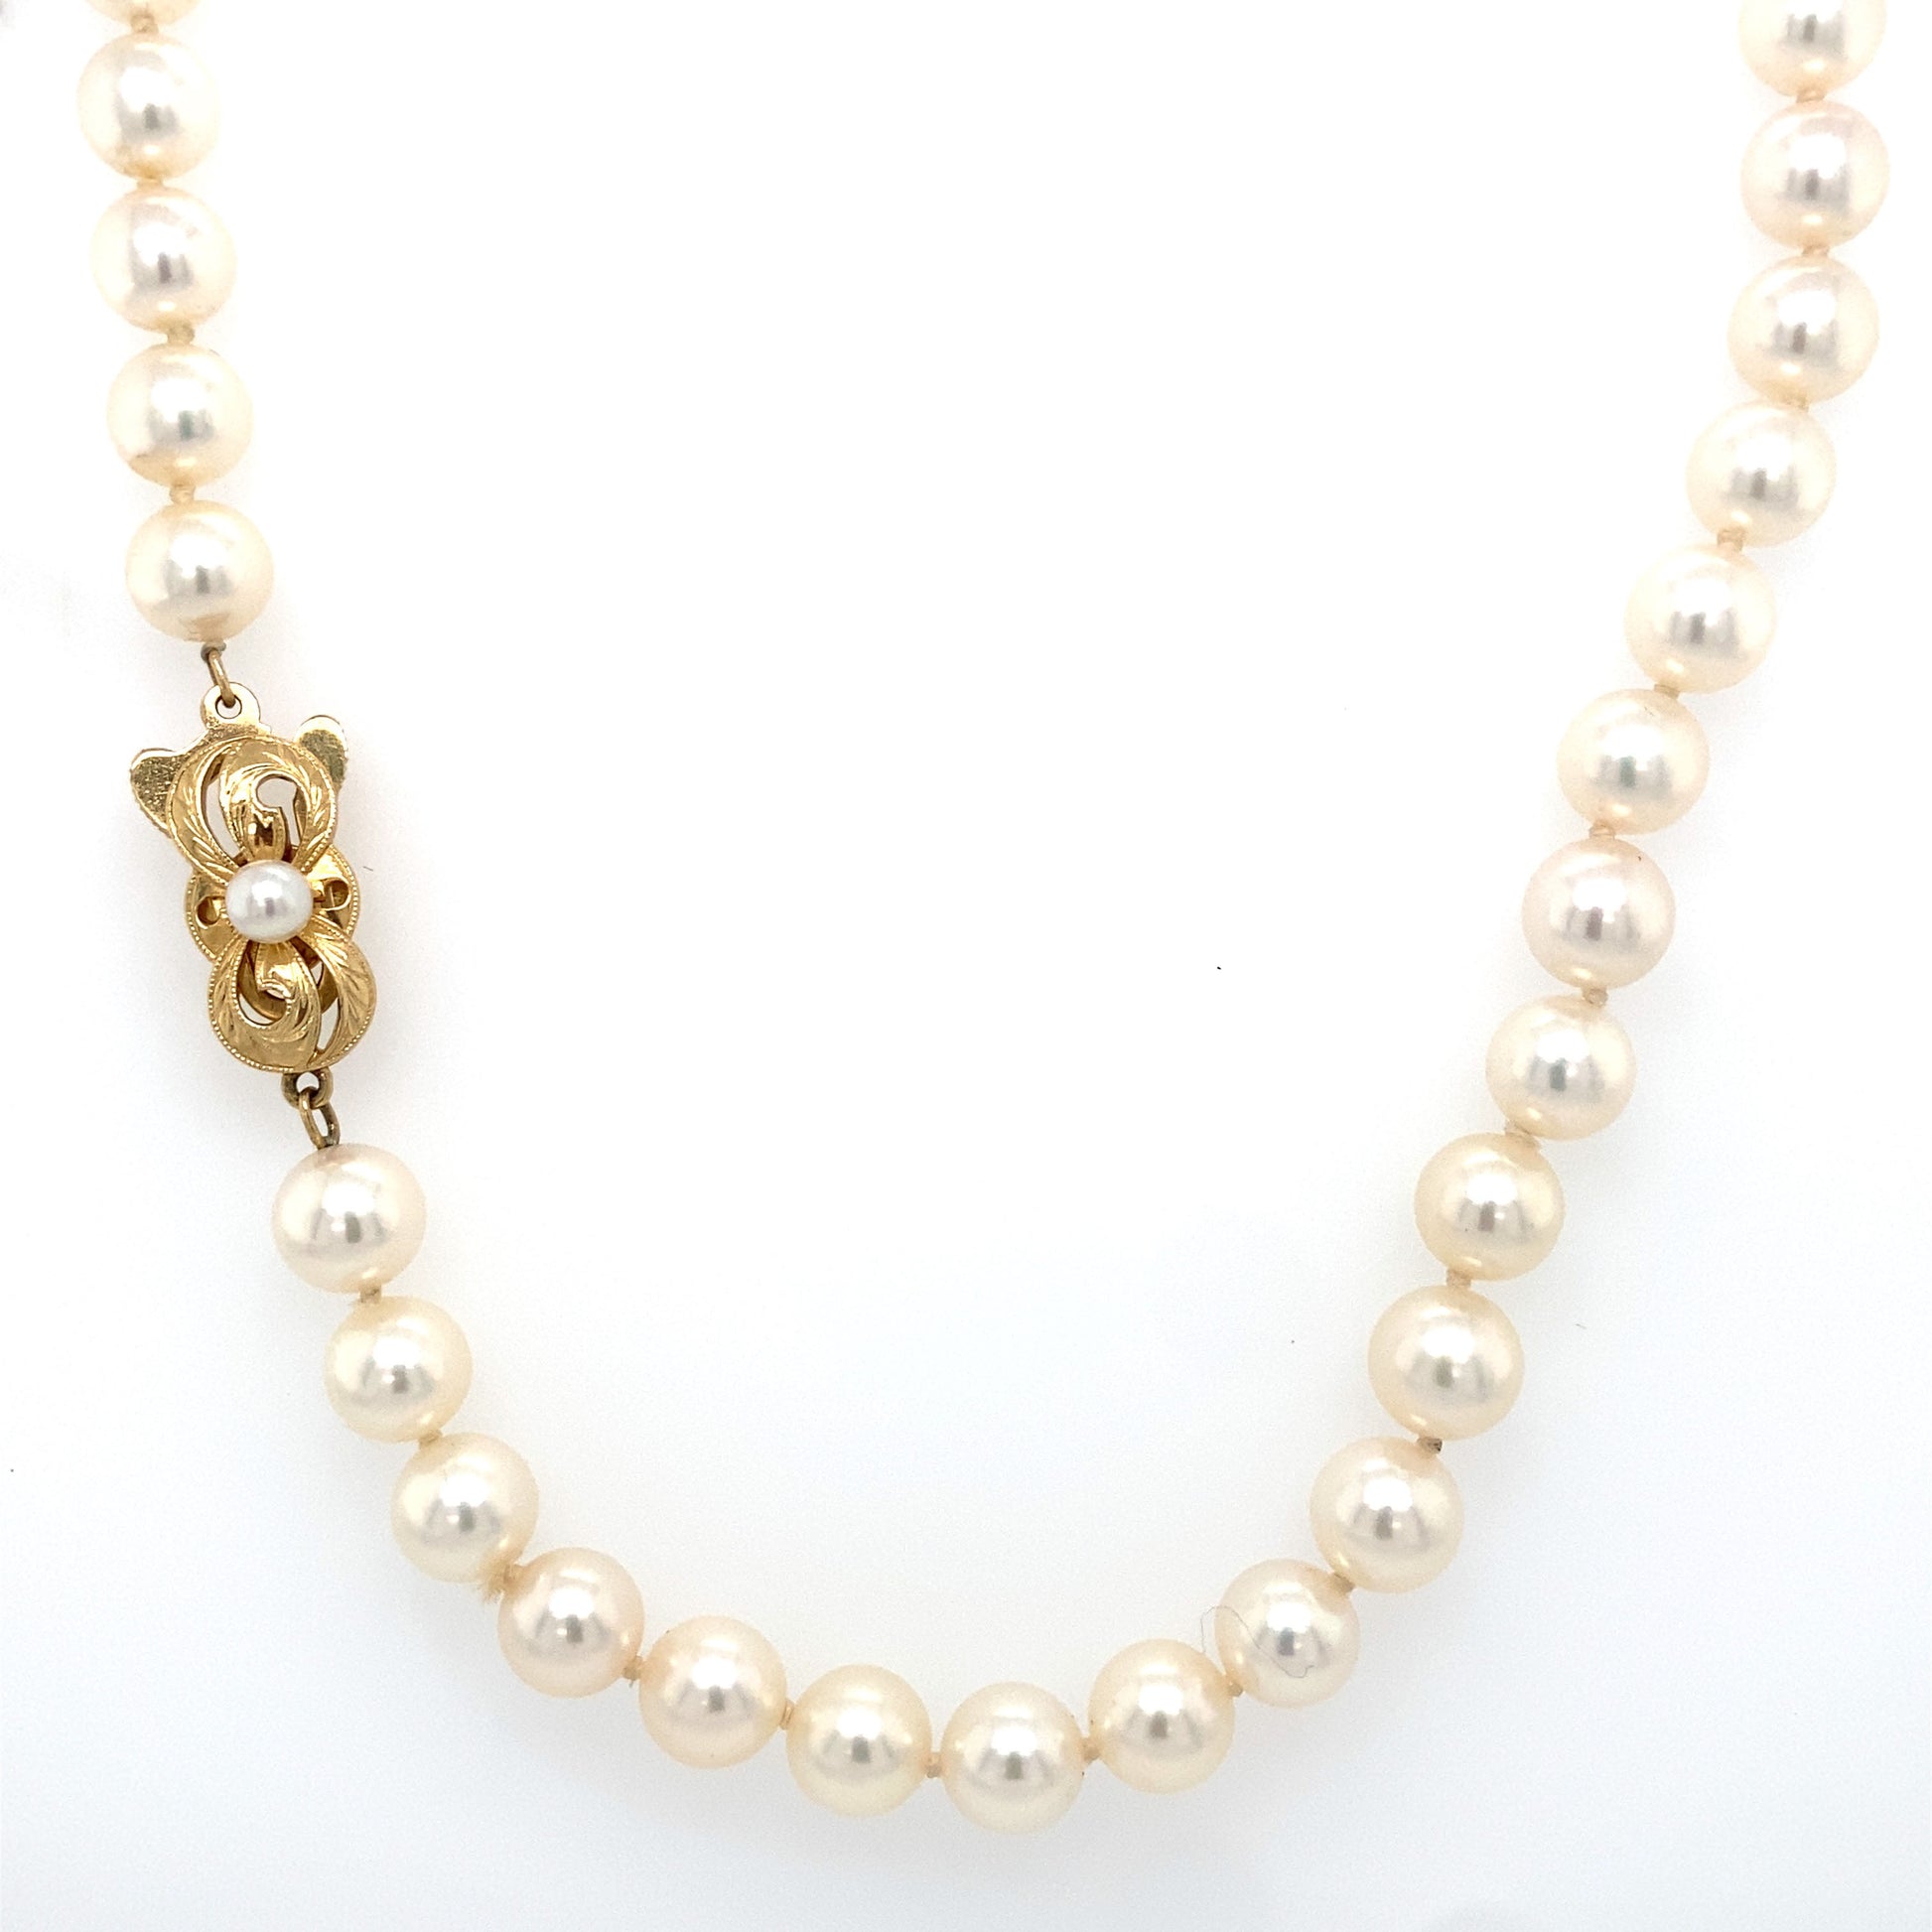 Estate Double Strand 23 Pearl Necklace with Floral Clasp